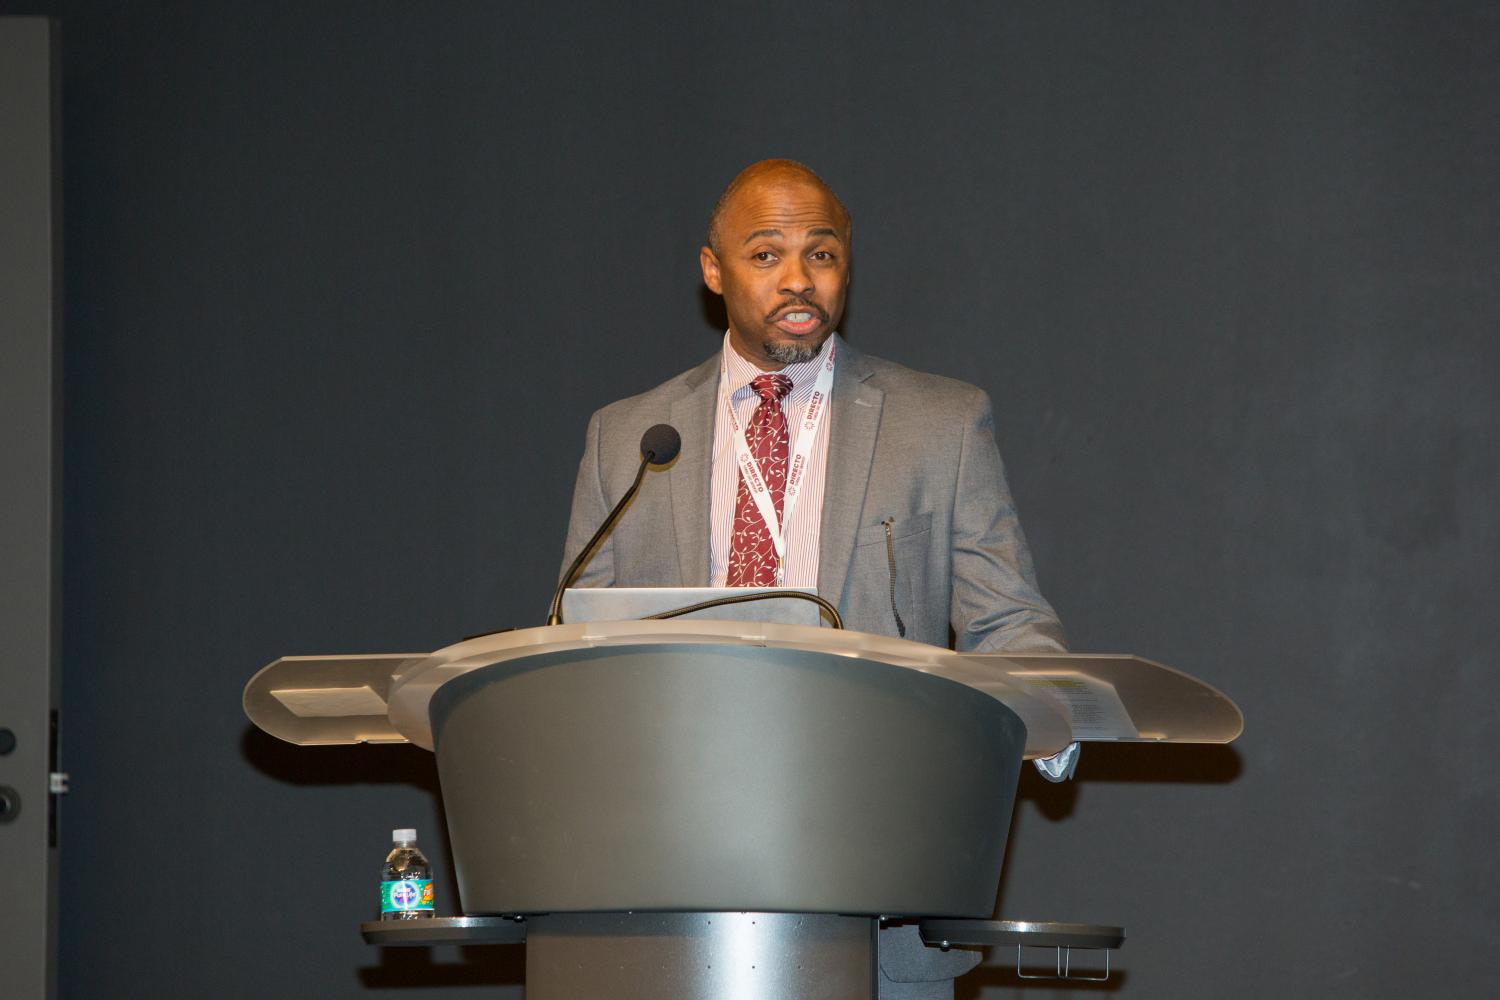 Dean James Frazier speaking at 2nd Annual Fall Symposium 